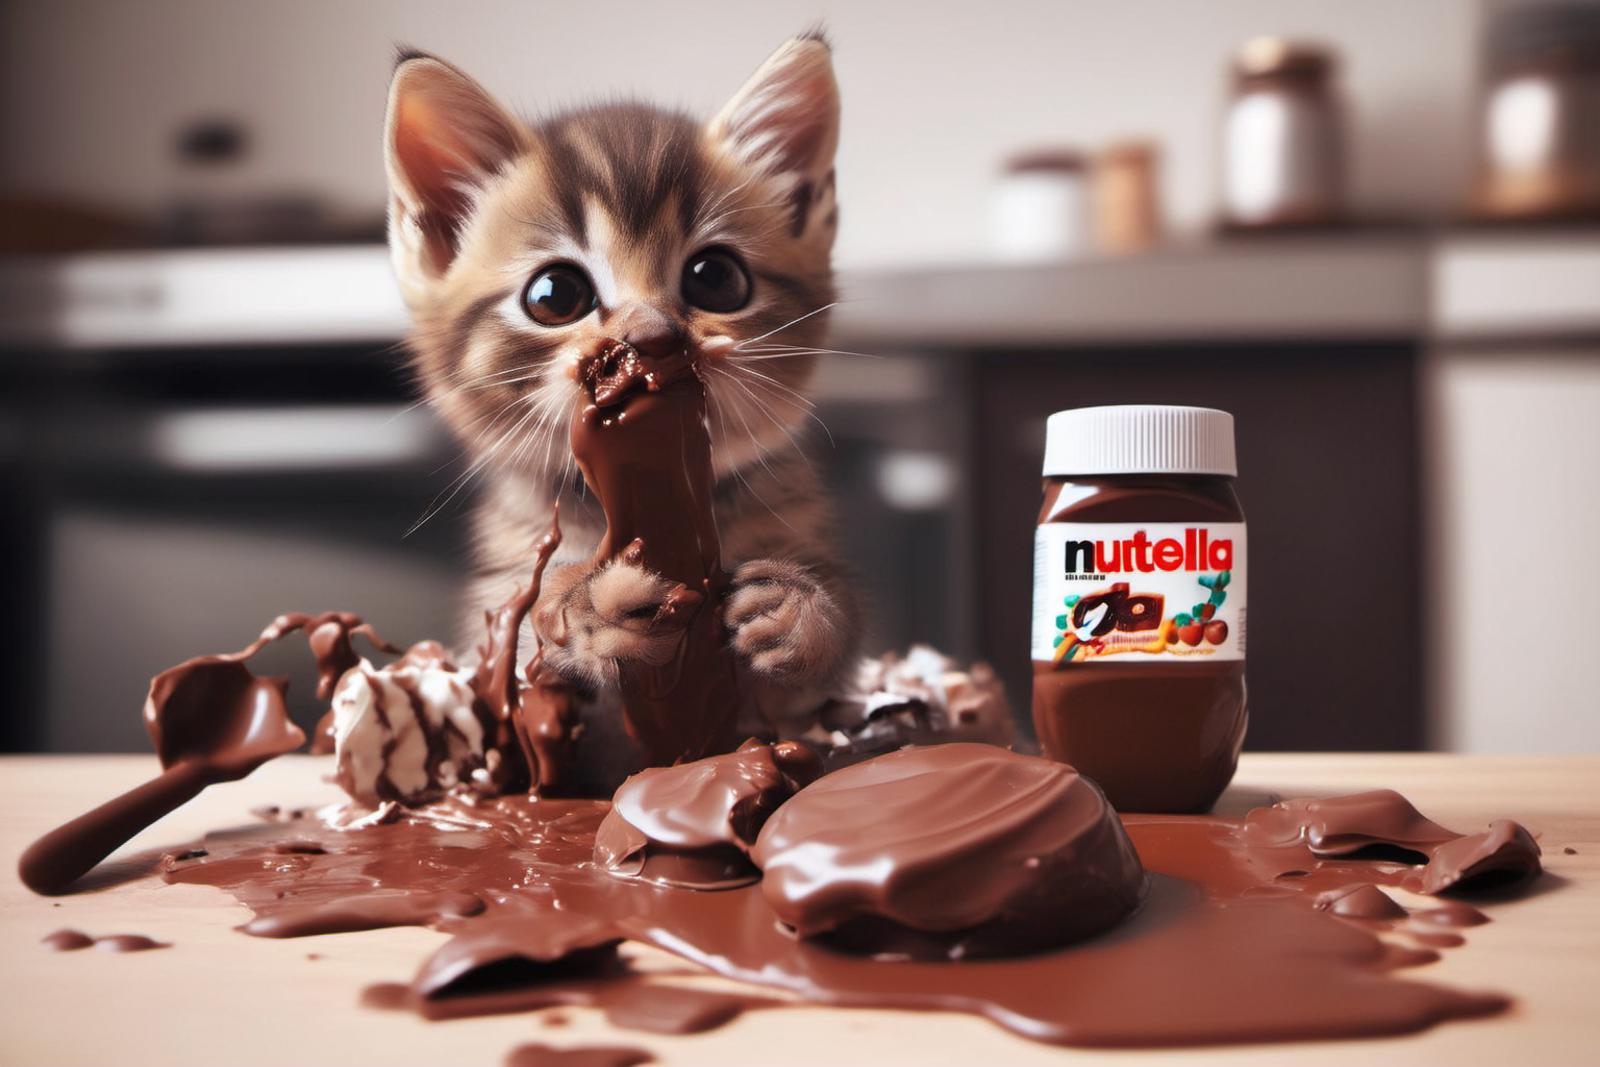 A Kitten Eating Nutella Out of a Jar with Chocolate Spread All Over the Table